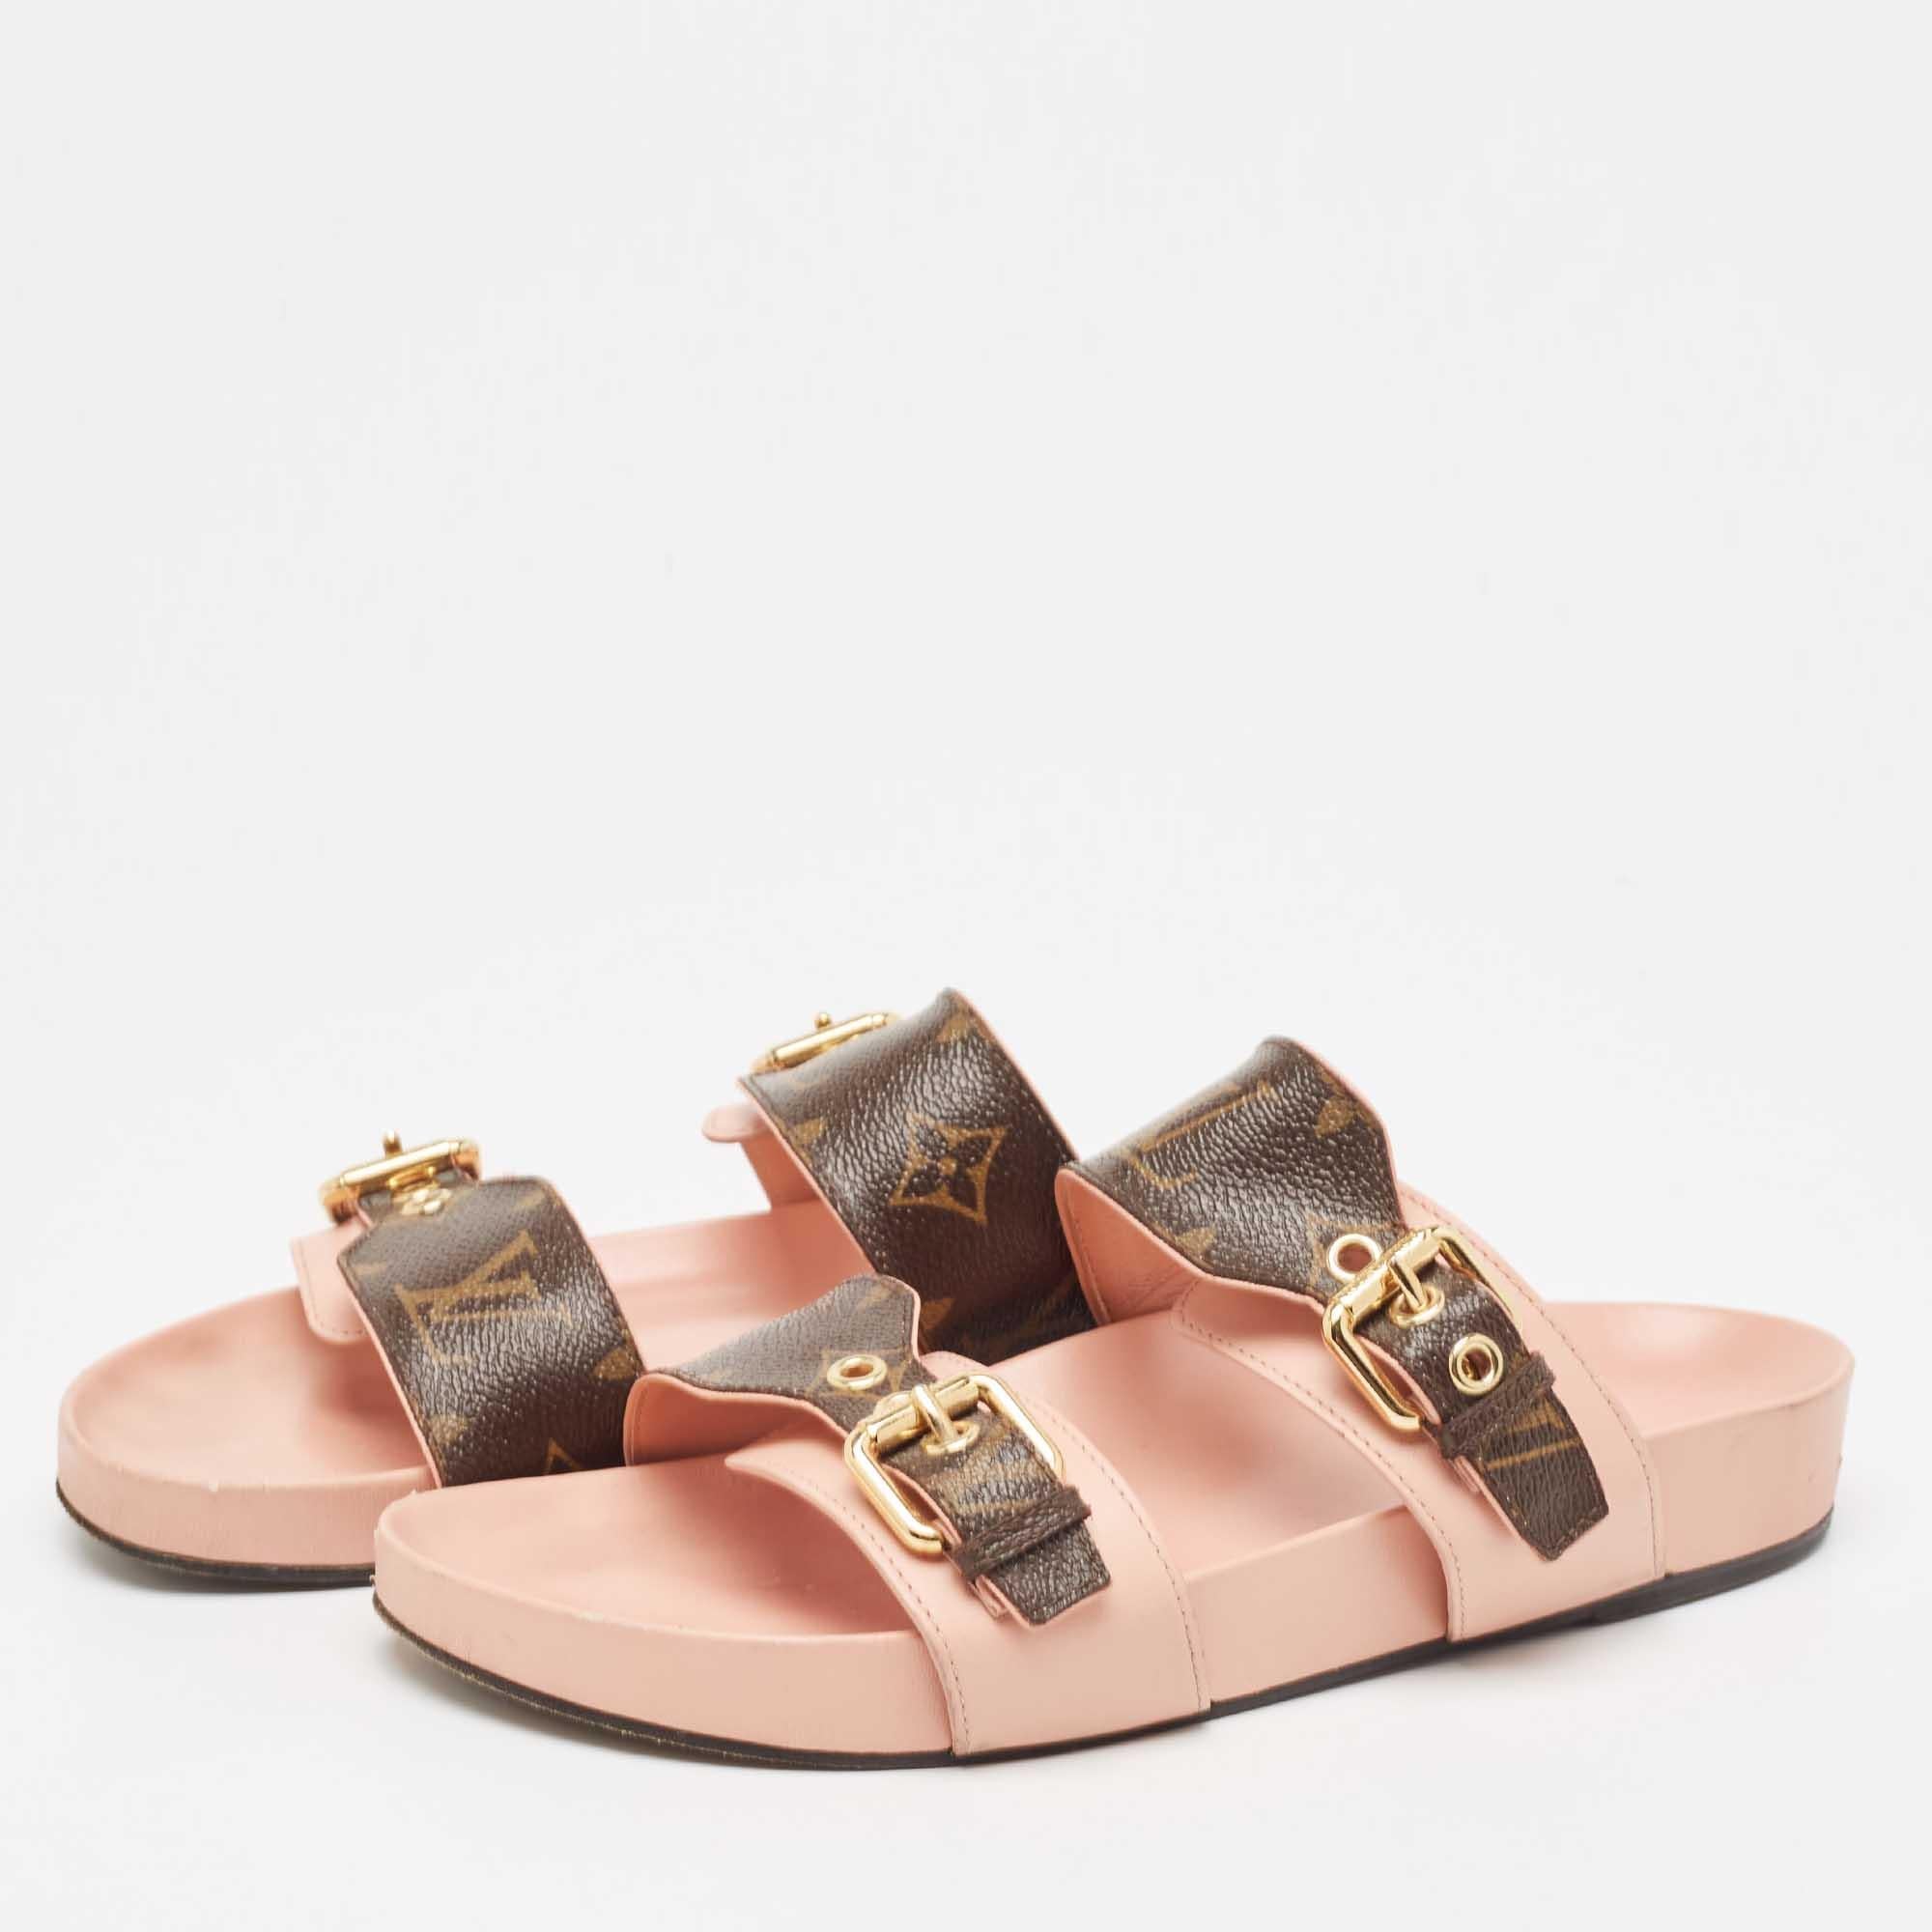 Louis Vuitton Pink/Brown Monogram Canvas and Leather Bom Dia Flat Slides Size 38 3